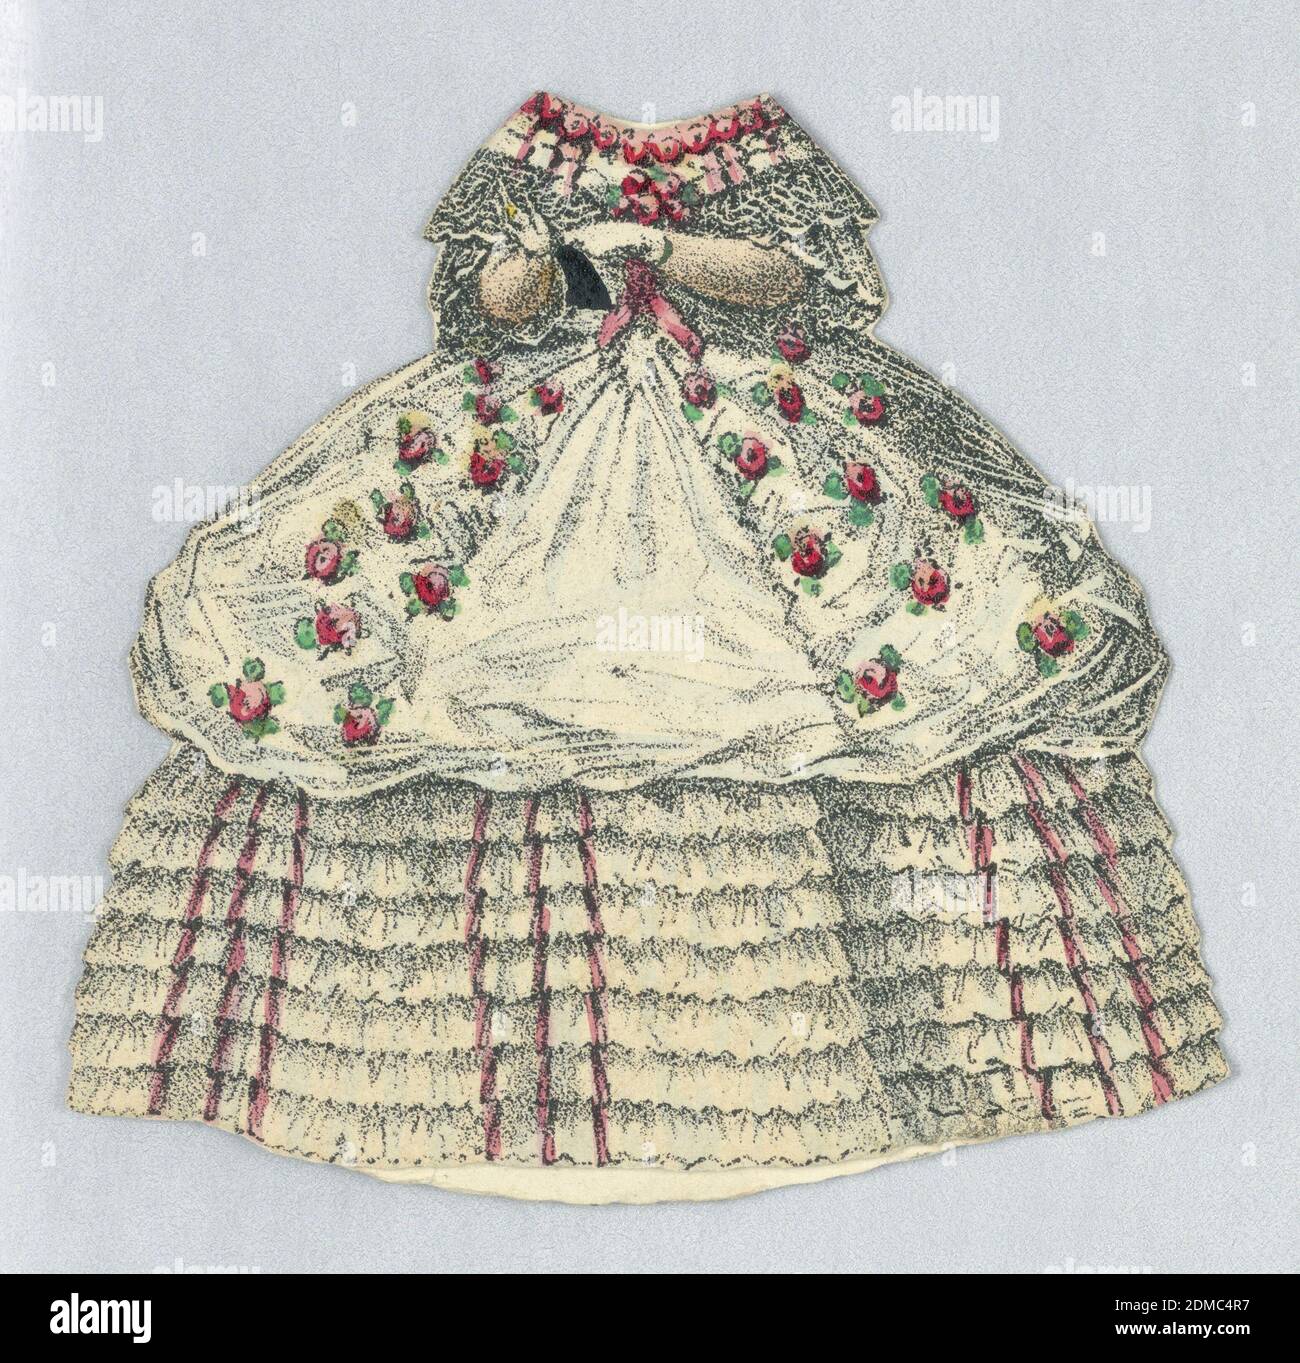 Paper Doll Costume in White with Red Roses, Lithograph, brush and watercolor on cream heavy wove paper, White dress lined with red roses at the neckline and roses on the upper portion of her dress. White lace sleeves, and many small layers of white ruffle also adorn the dress. Both back and front of dress depicted., USA, 1876–80, toys & games, Paper doll costume, Paper doll costume Stock Photo